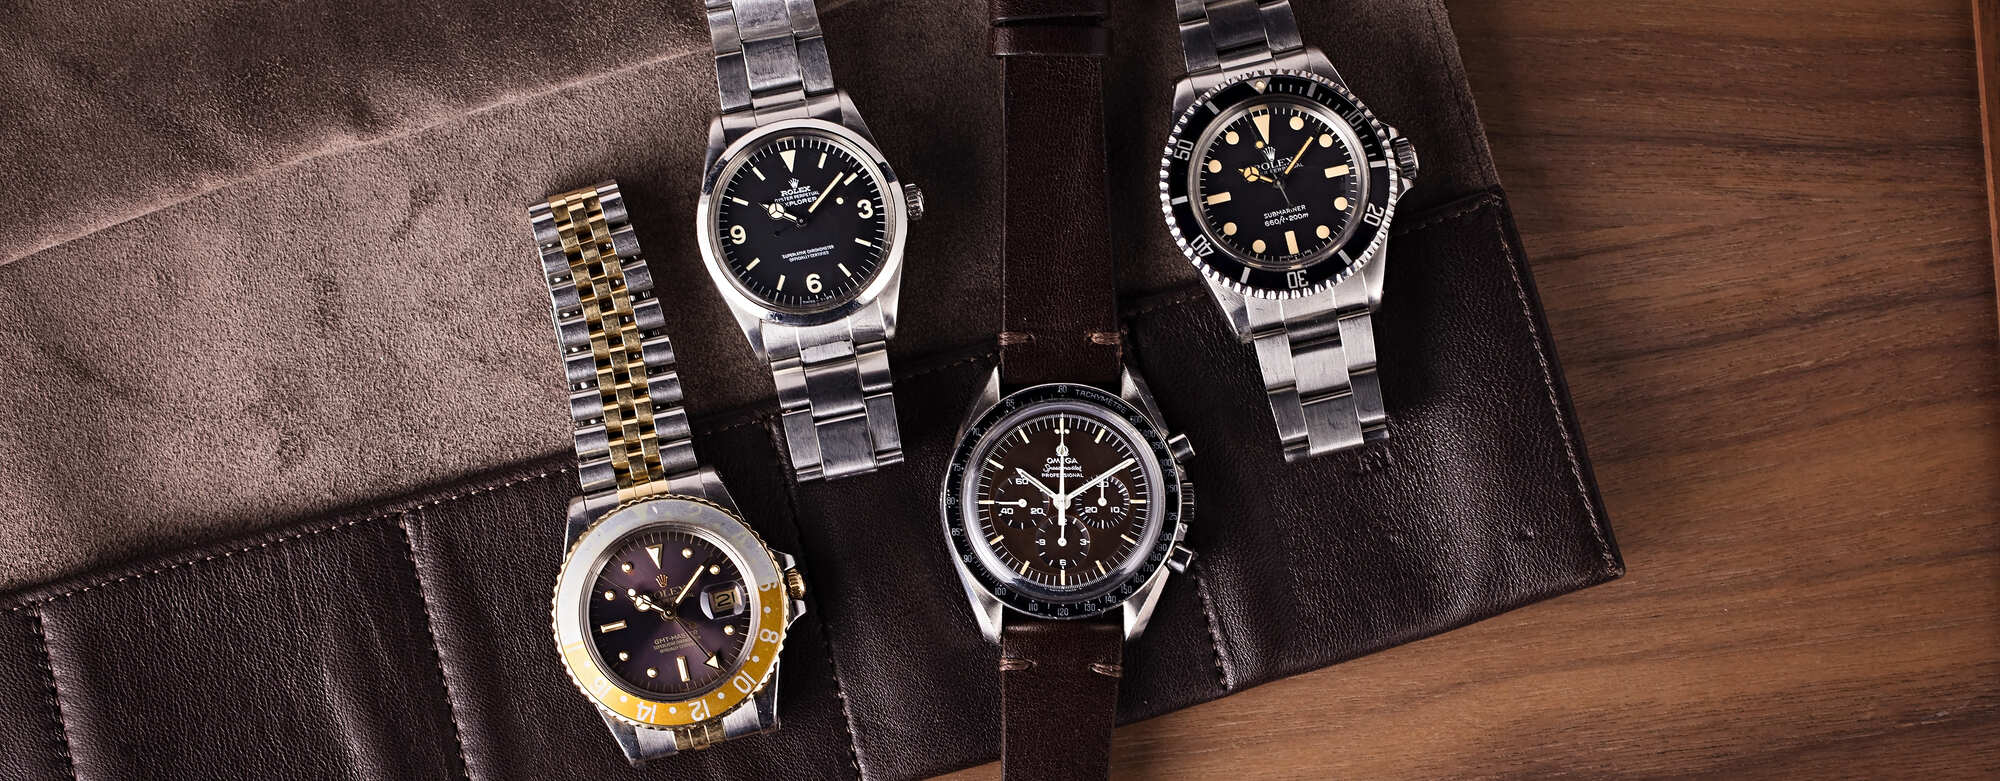 4 Vintage Watches Fresh-to-Market to be Auctioned at Bob’s Watches